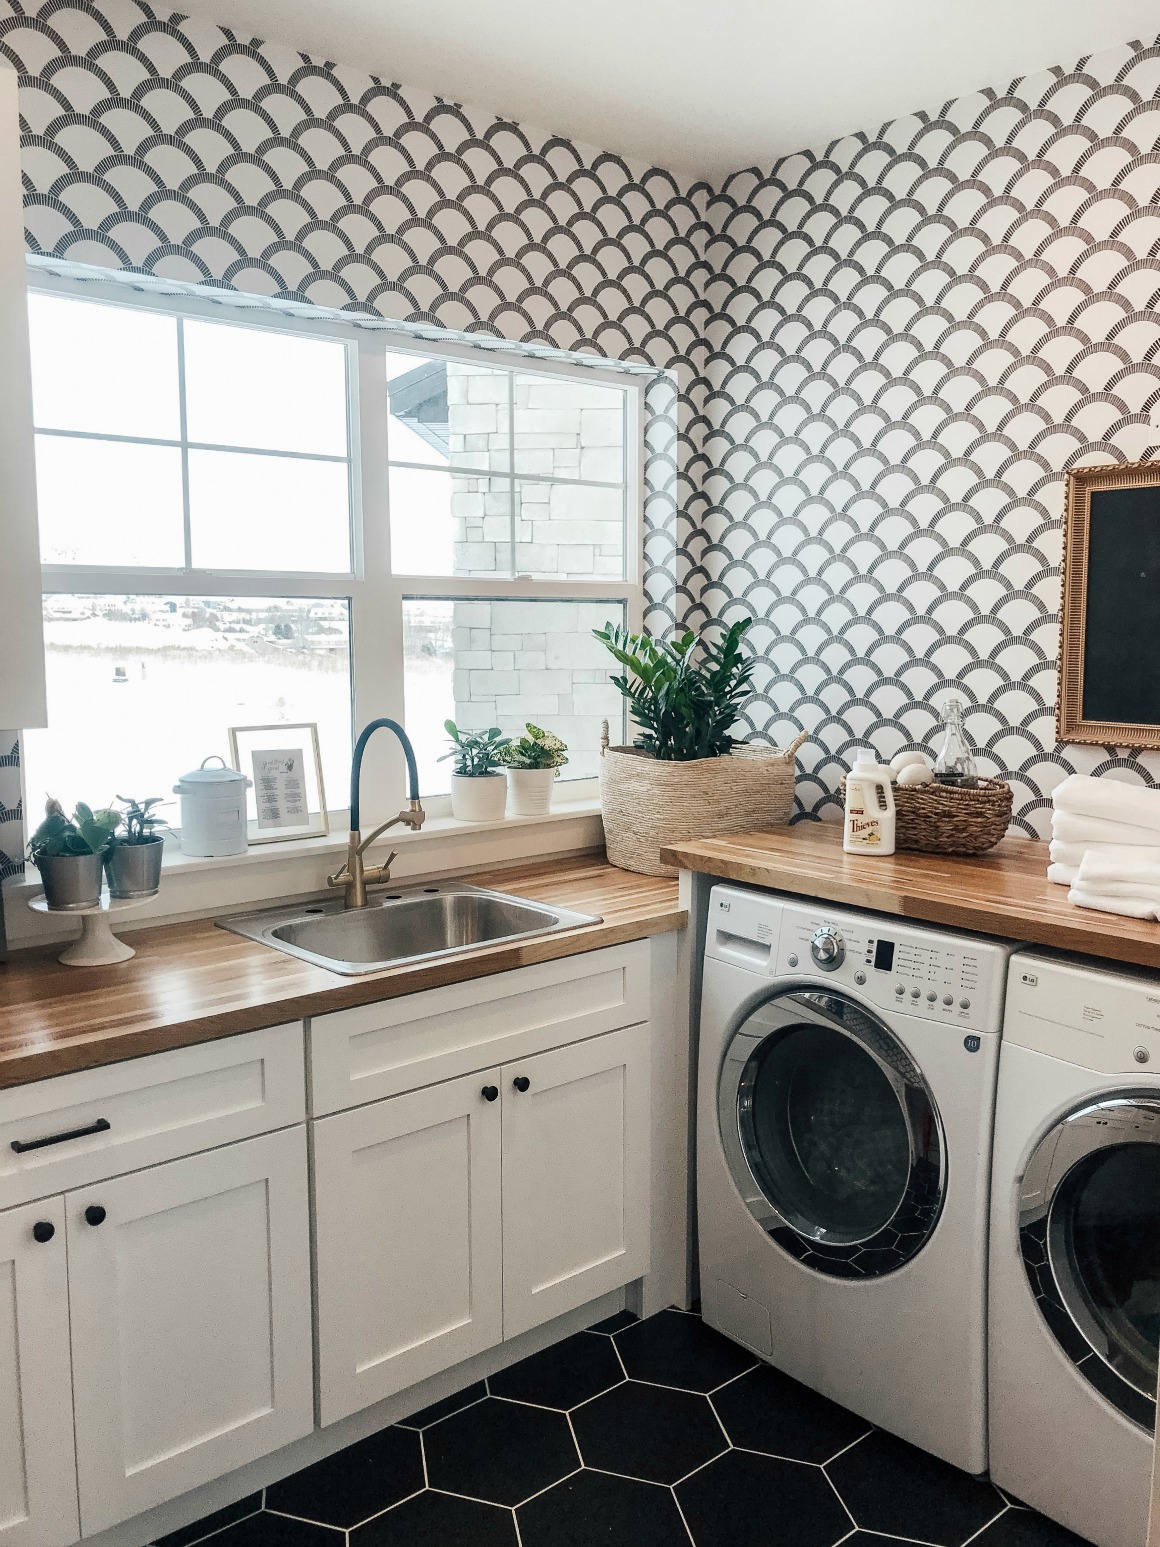 Brand New Laundry Room Gets Some Character